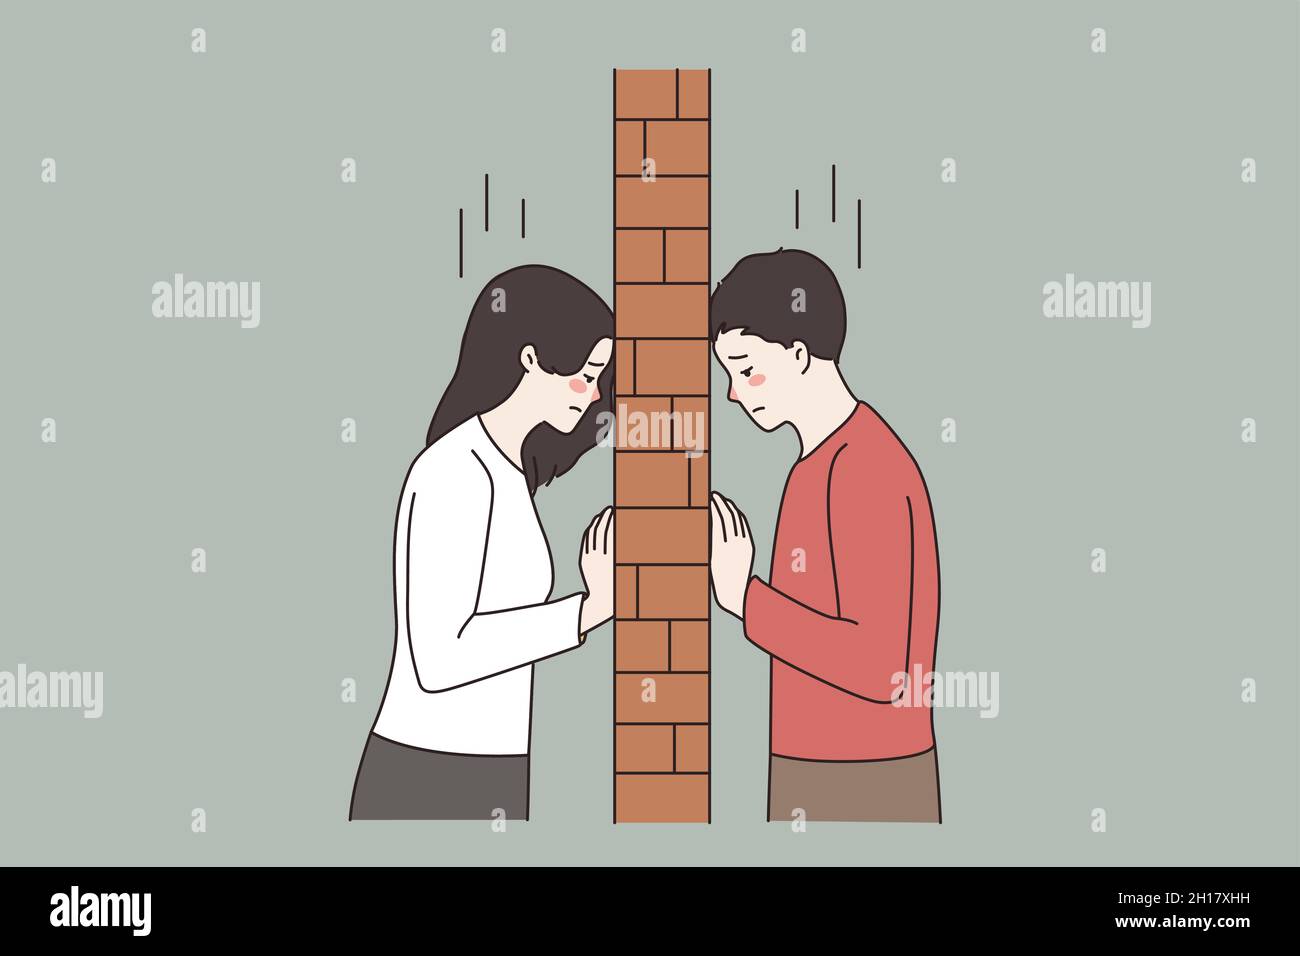 Unhappy young couple separated with brick wall. Upset man and woman lovers divided, have relationship problems. Breakup, divorce, separation. Misunderstanding in family. Vector illustration.  Stock Vector